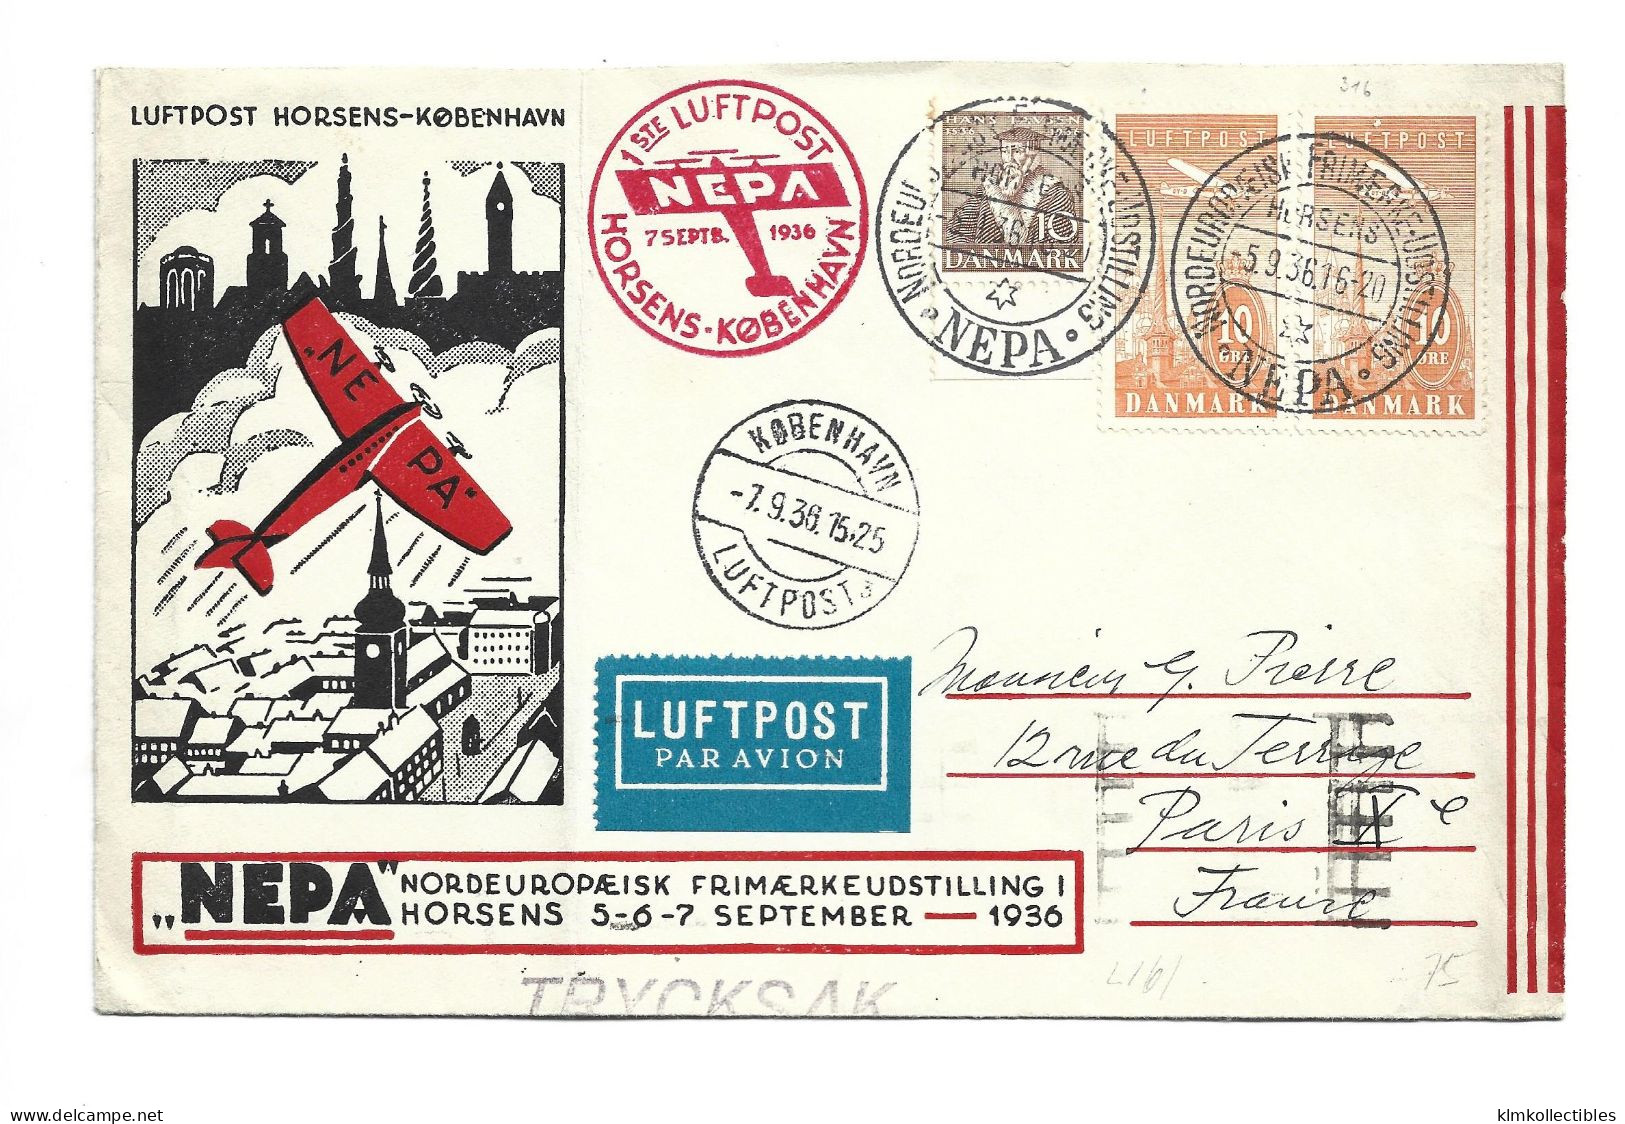 DENMARK DANMARK - AIRMAIL LUFTPOST COVER TO FRANCE - 1936 NEPA SPECIAL CANCEL FIRST 1ST FLIGHT - Poste Aérienne